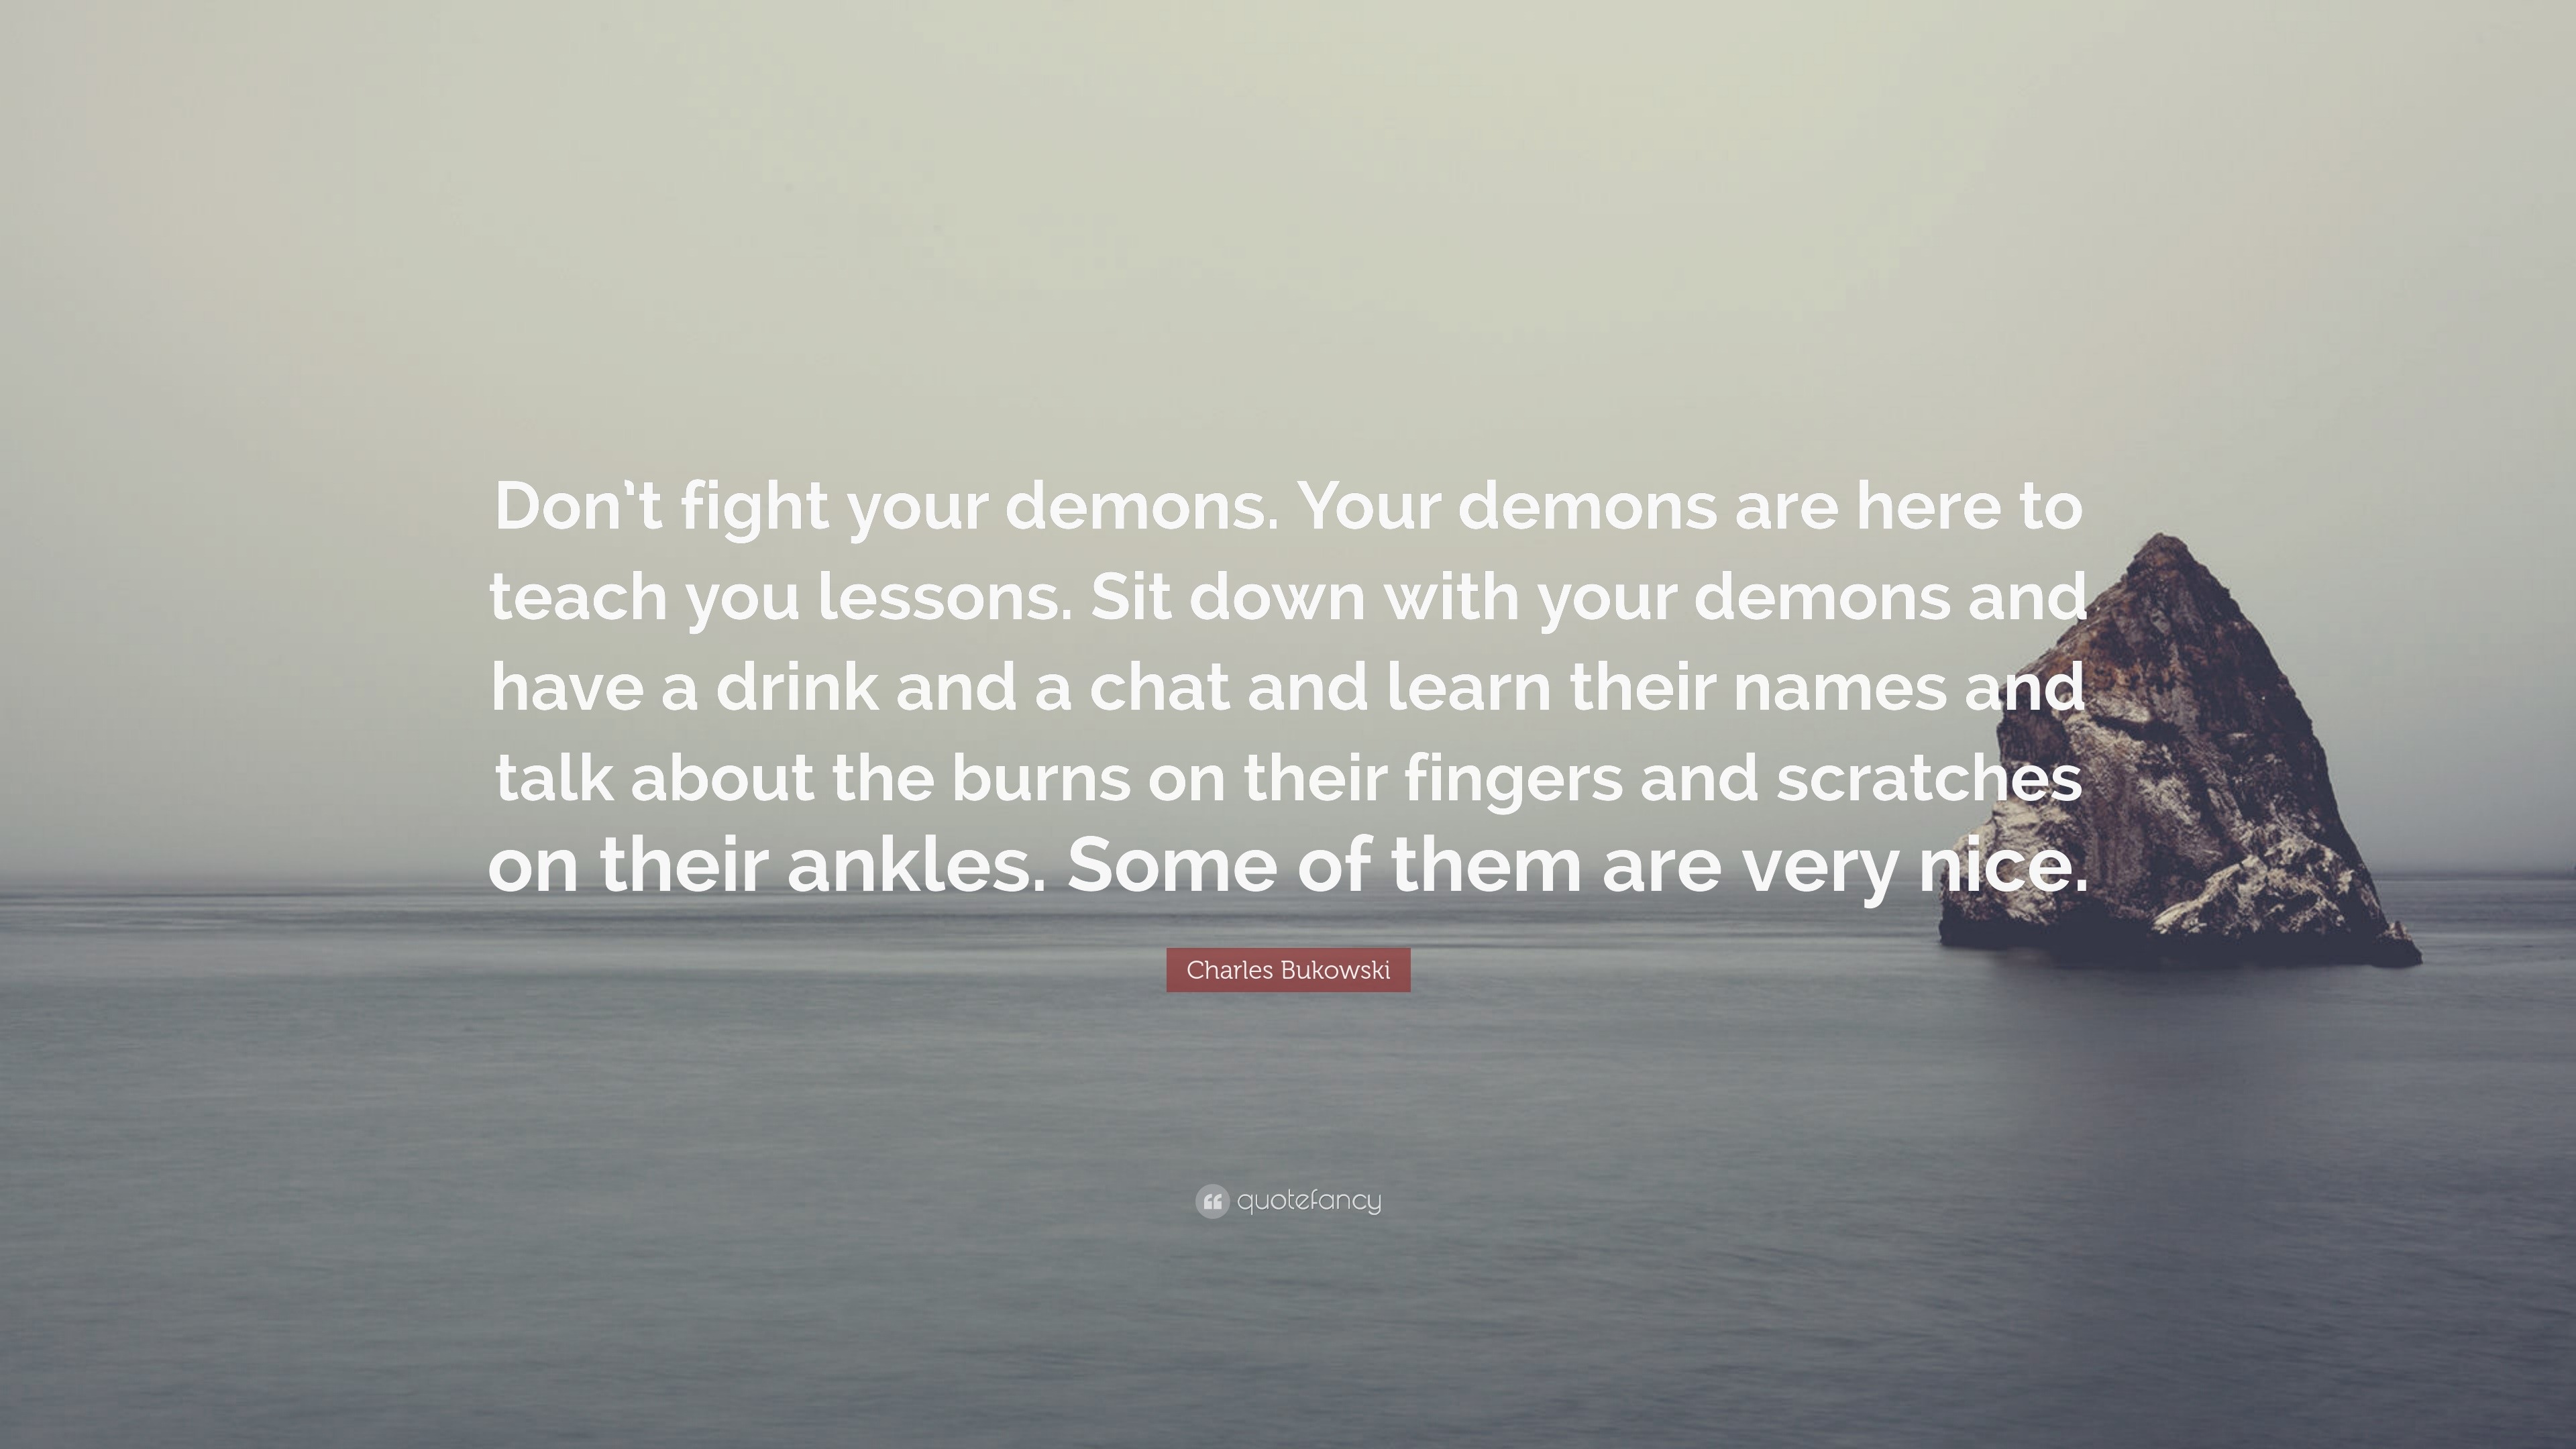 Charles Bukowski Quote: “Don’t fight your demons. Your demons are here